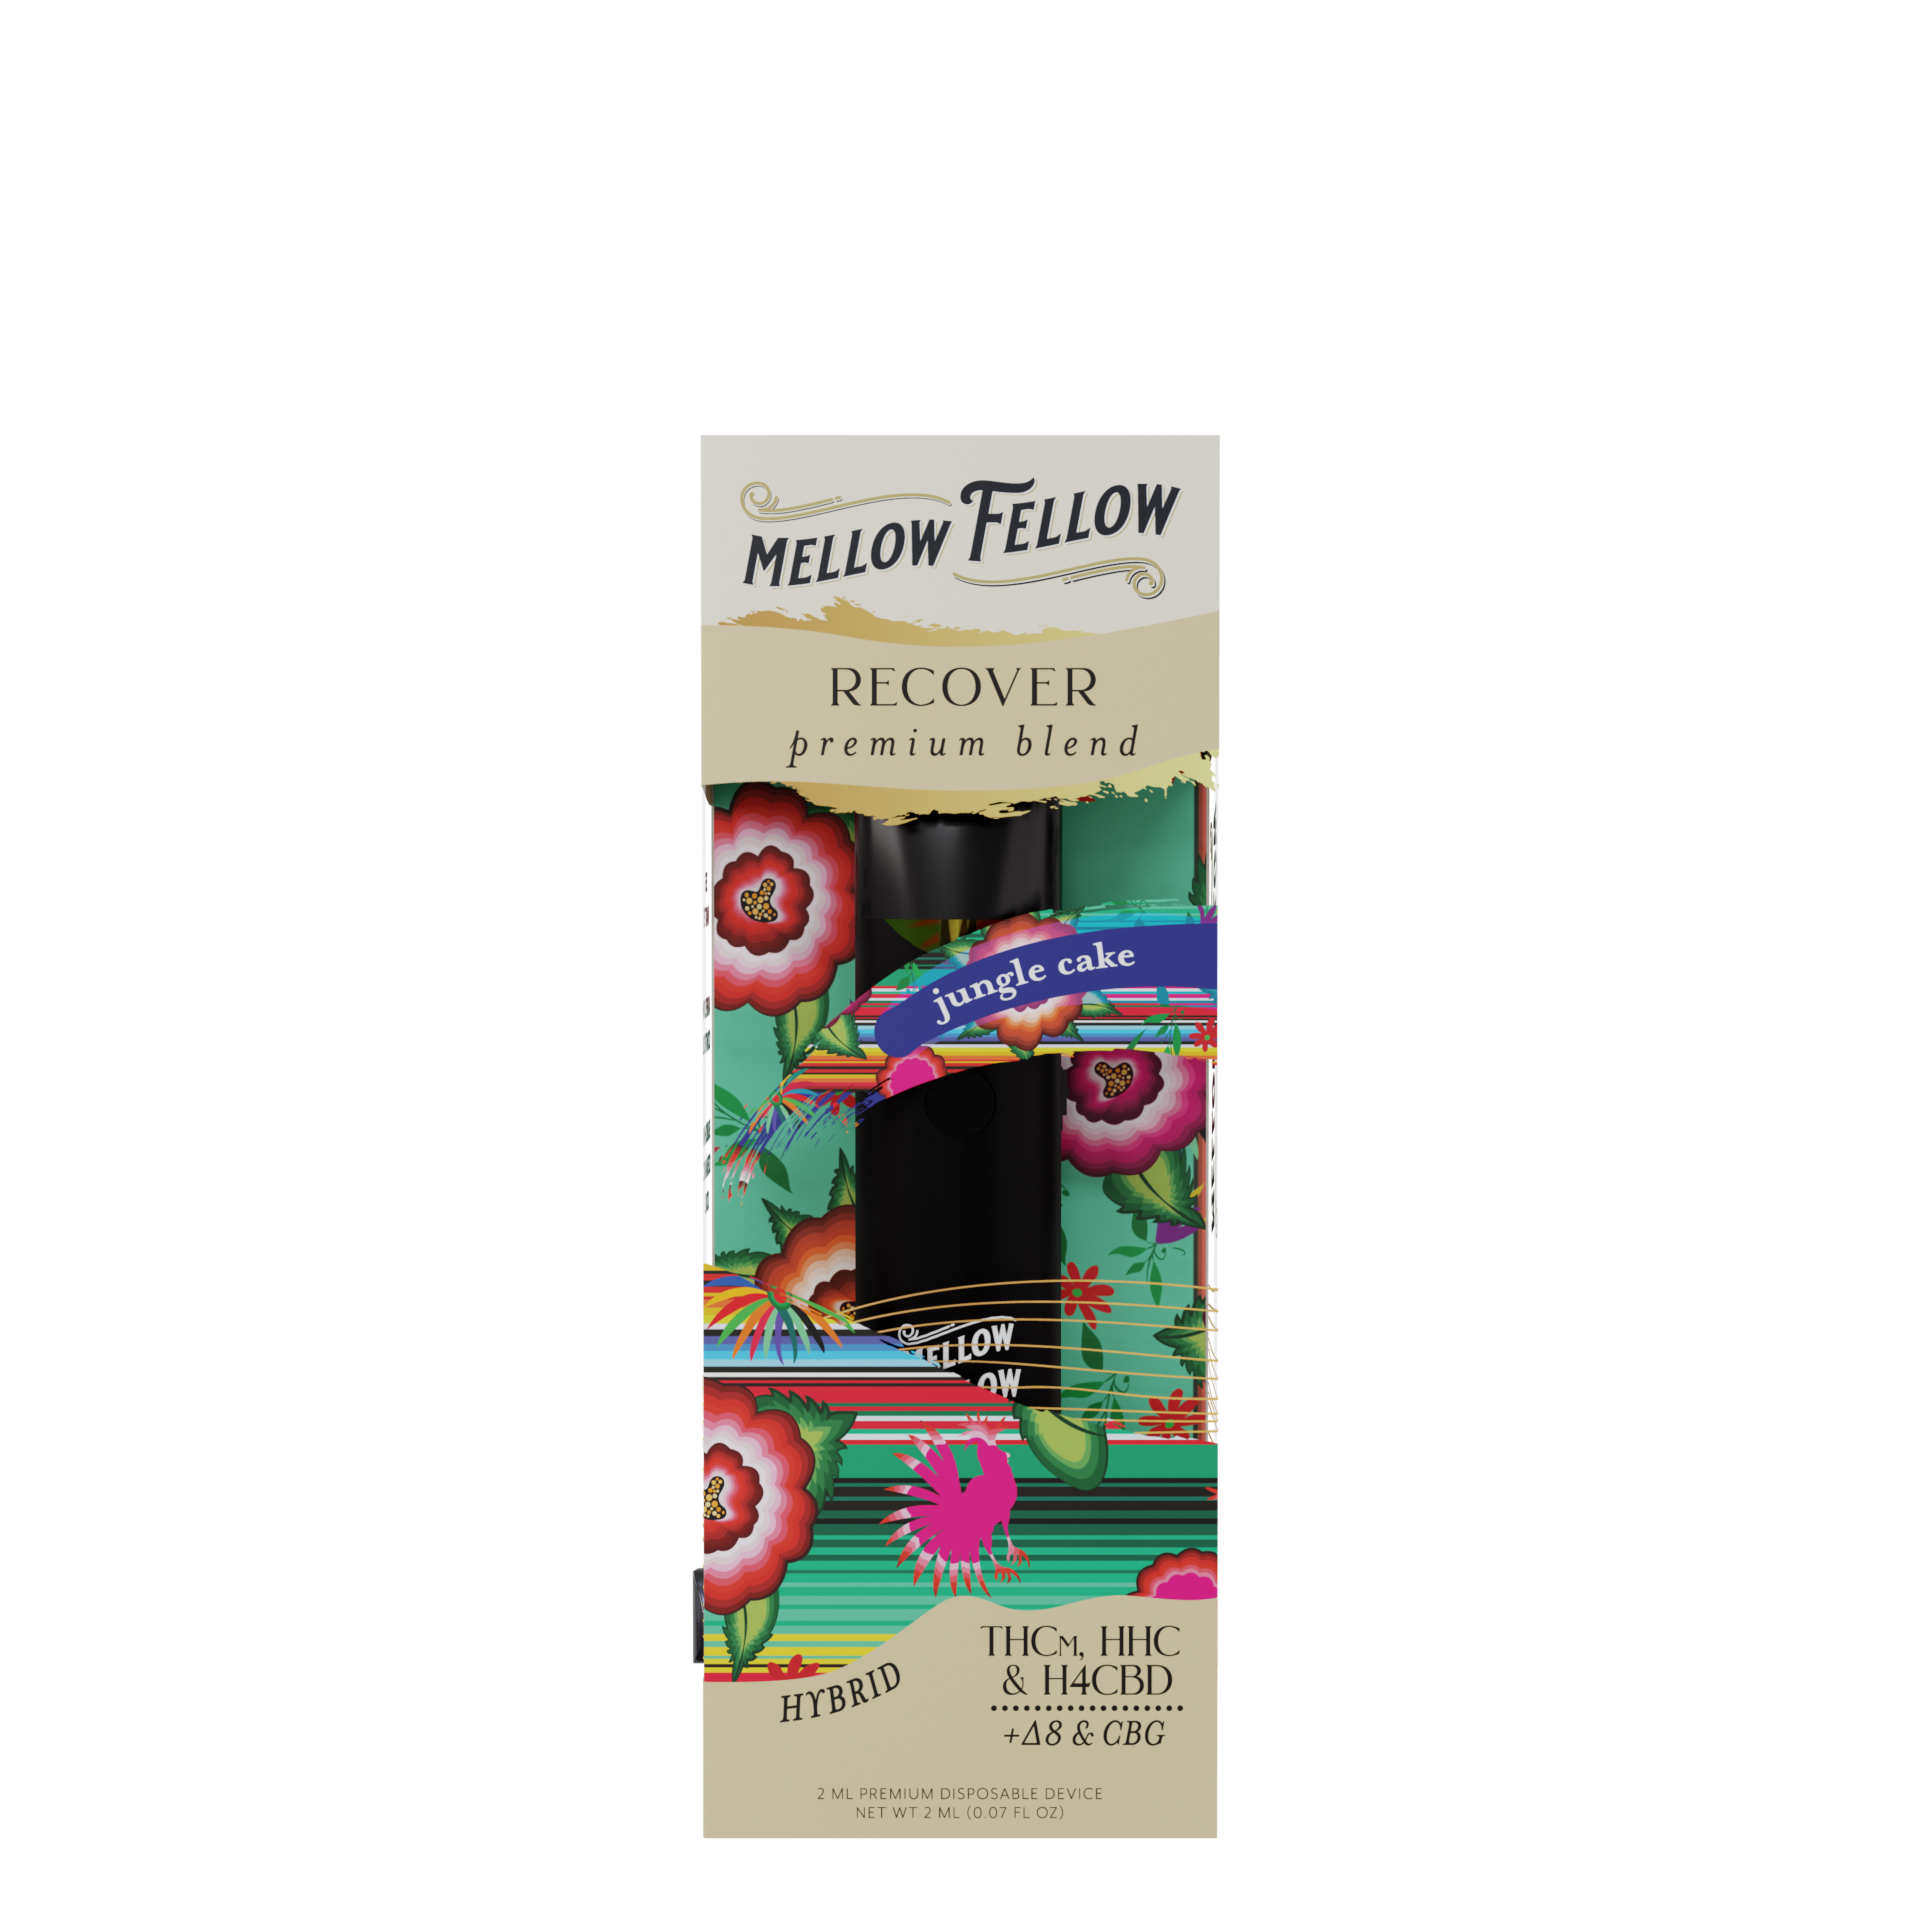 Mellow Fellow Clarity (Grease Monkey) & Recover (Jungle Cake) 2ml Disposable Vape - Day/Night Bundle Best Price